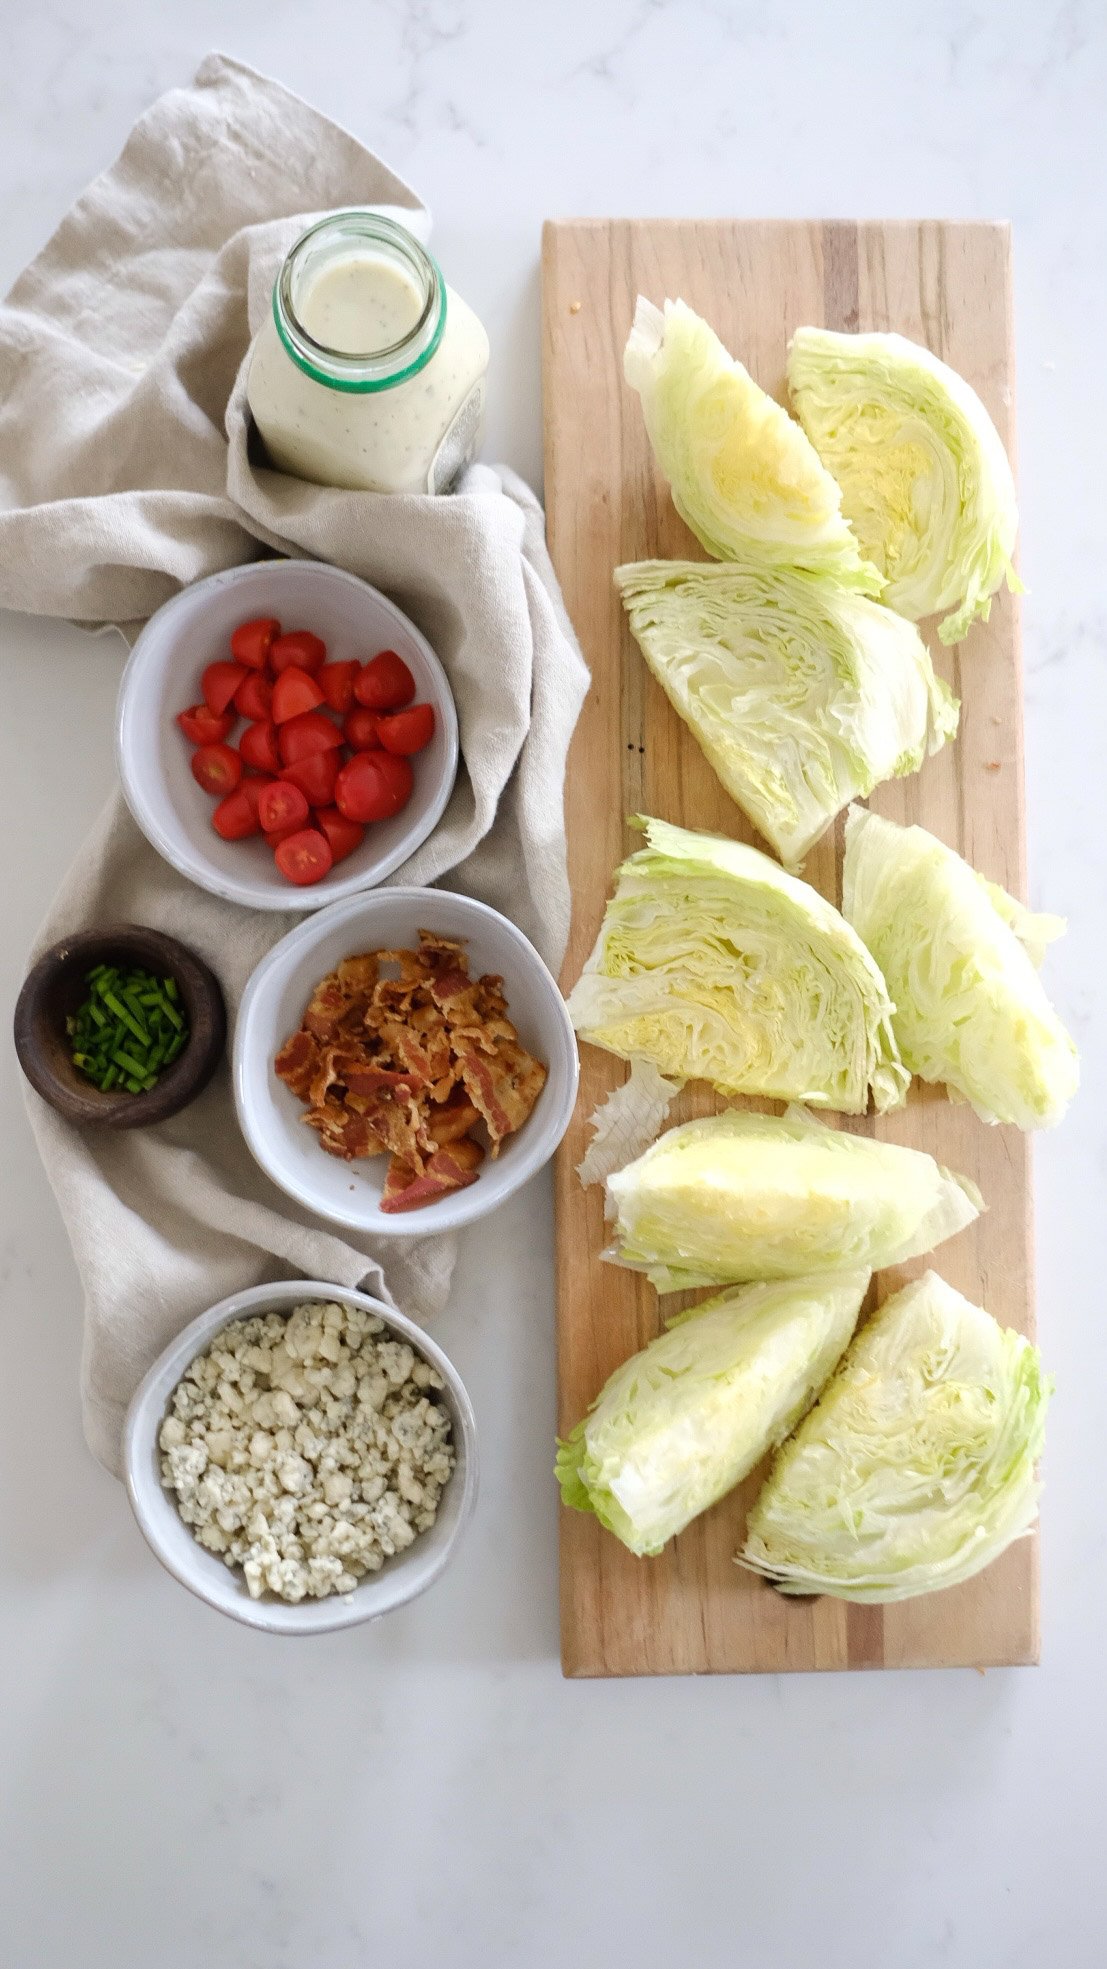 Ingredients for a Classic Wedge Salad